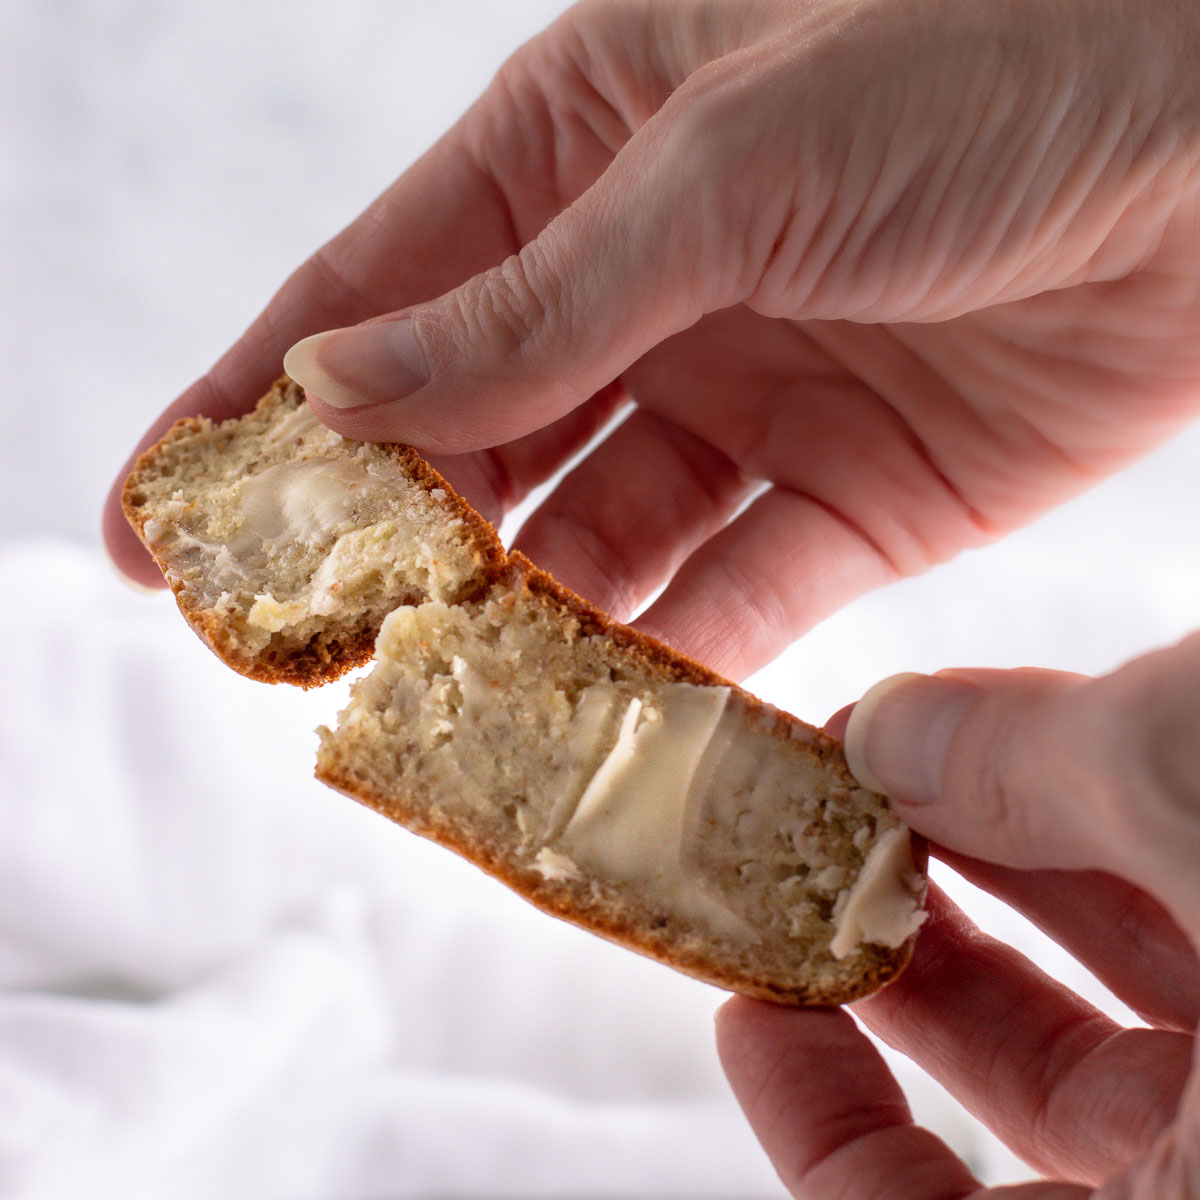 Two hands holding and breaking apart a slice of buttered bread.